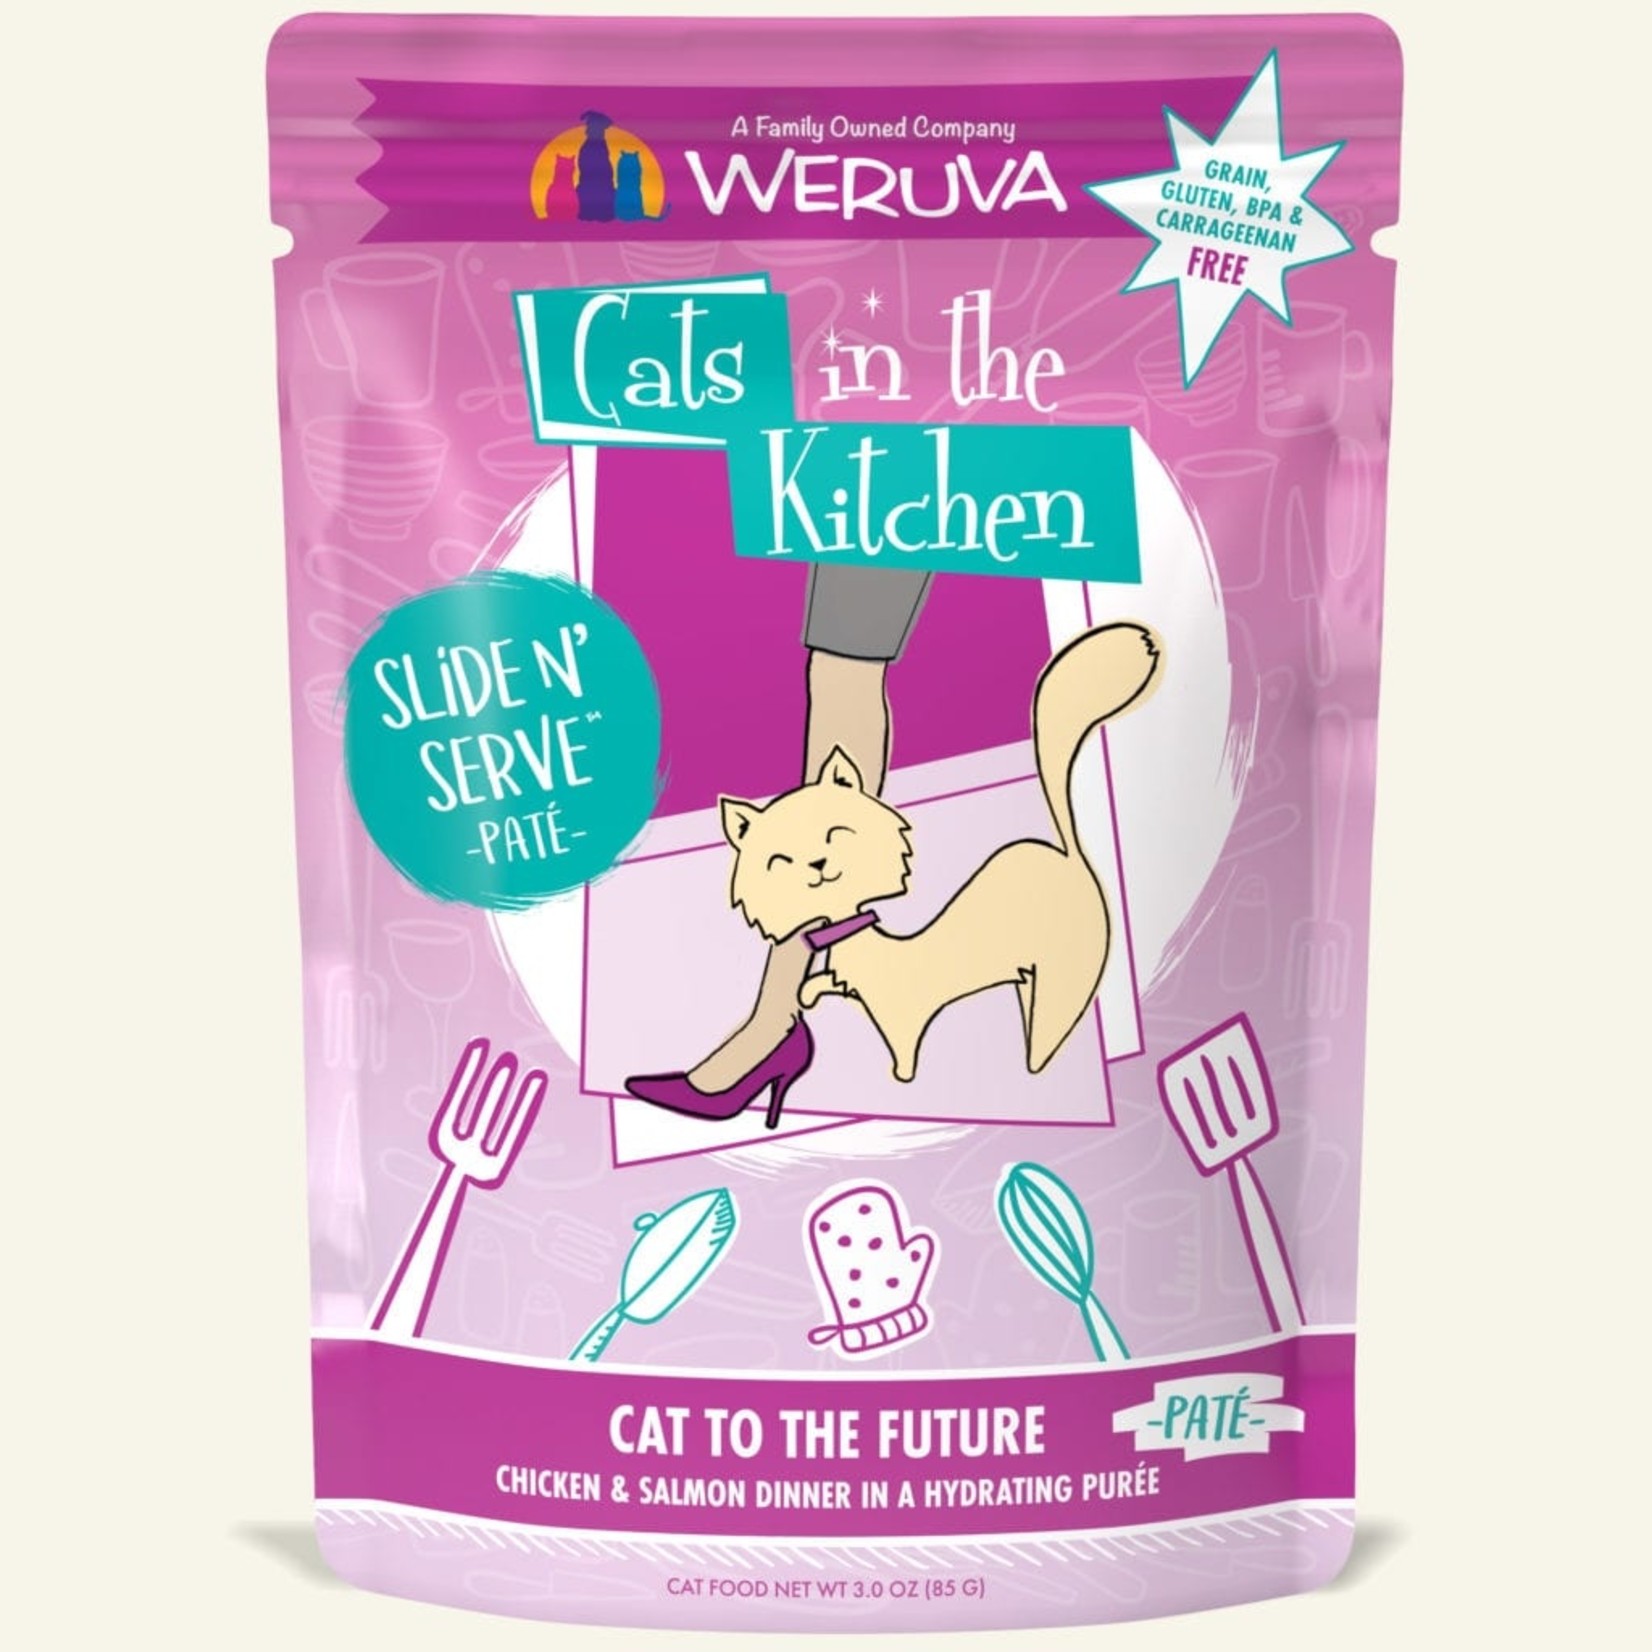 Weruva Weruva Wet Cat Food Cats in the Kitchen Slide and Serve Pate Pouch Cat to the Future Chicken and Salmon Dinner 3oz